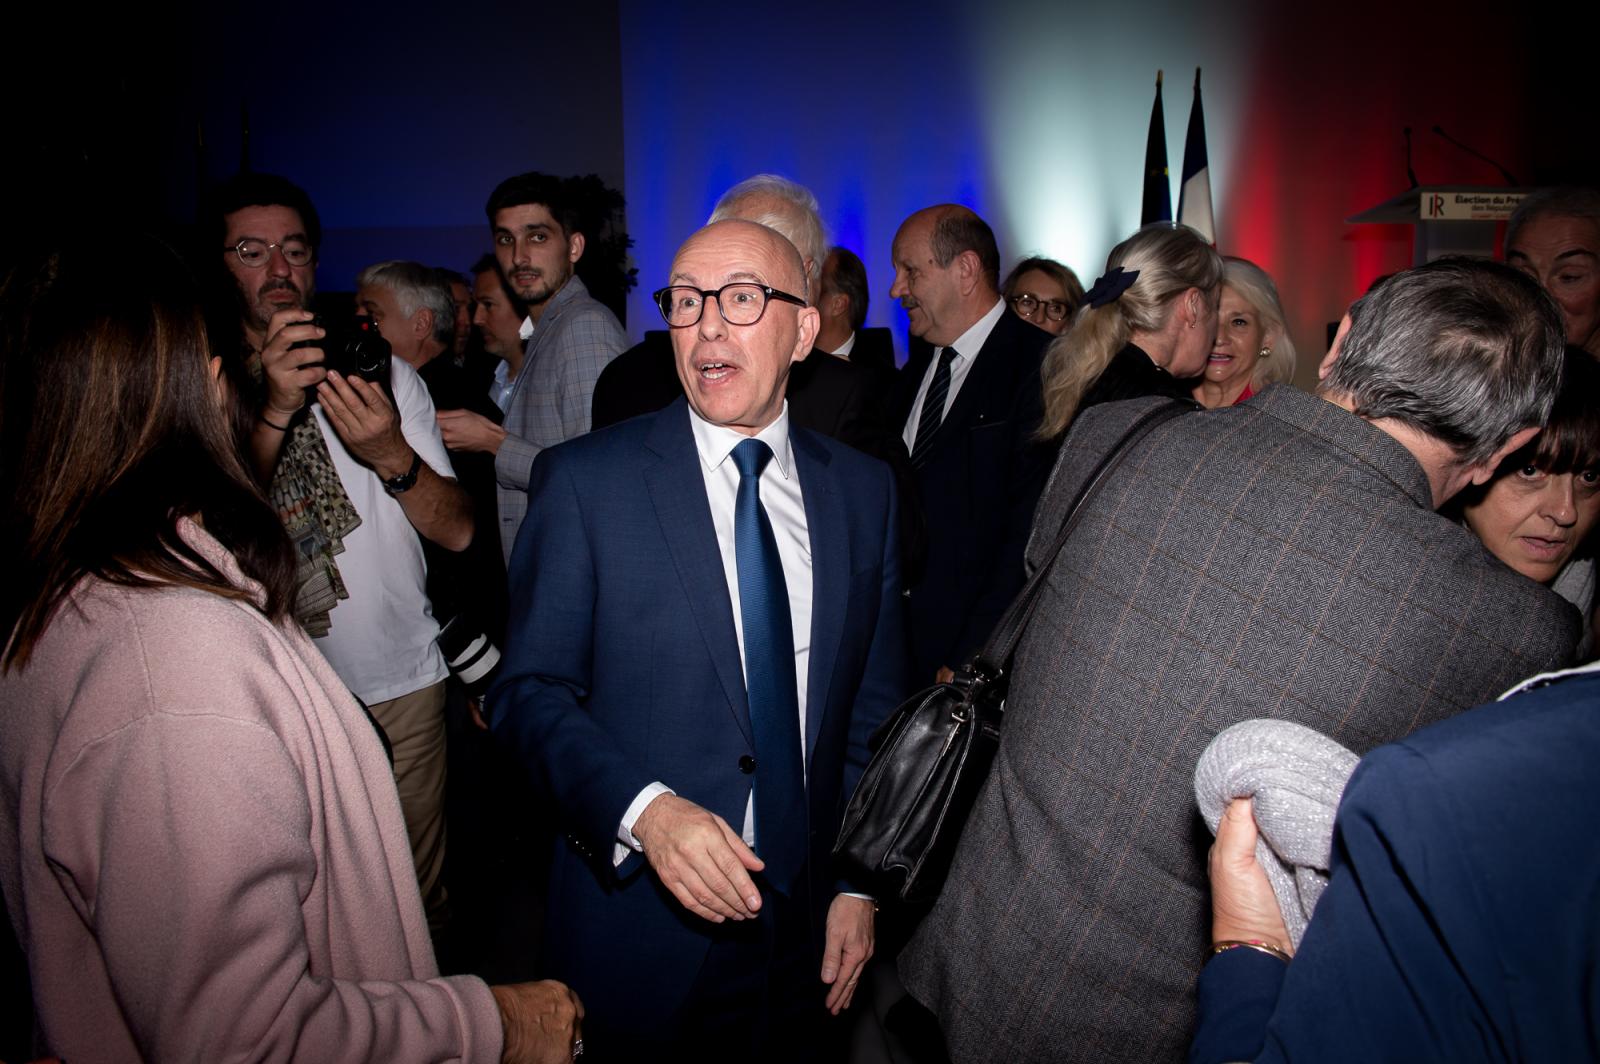 Image from politics - France, Le Cannet, 2022-11-27: Eric Ciotti is running for...